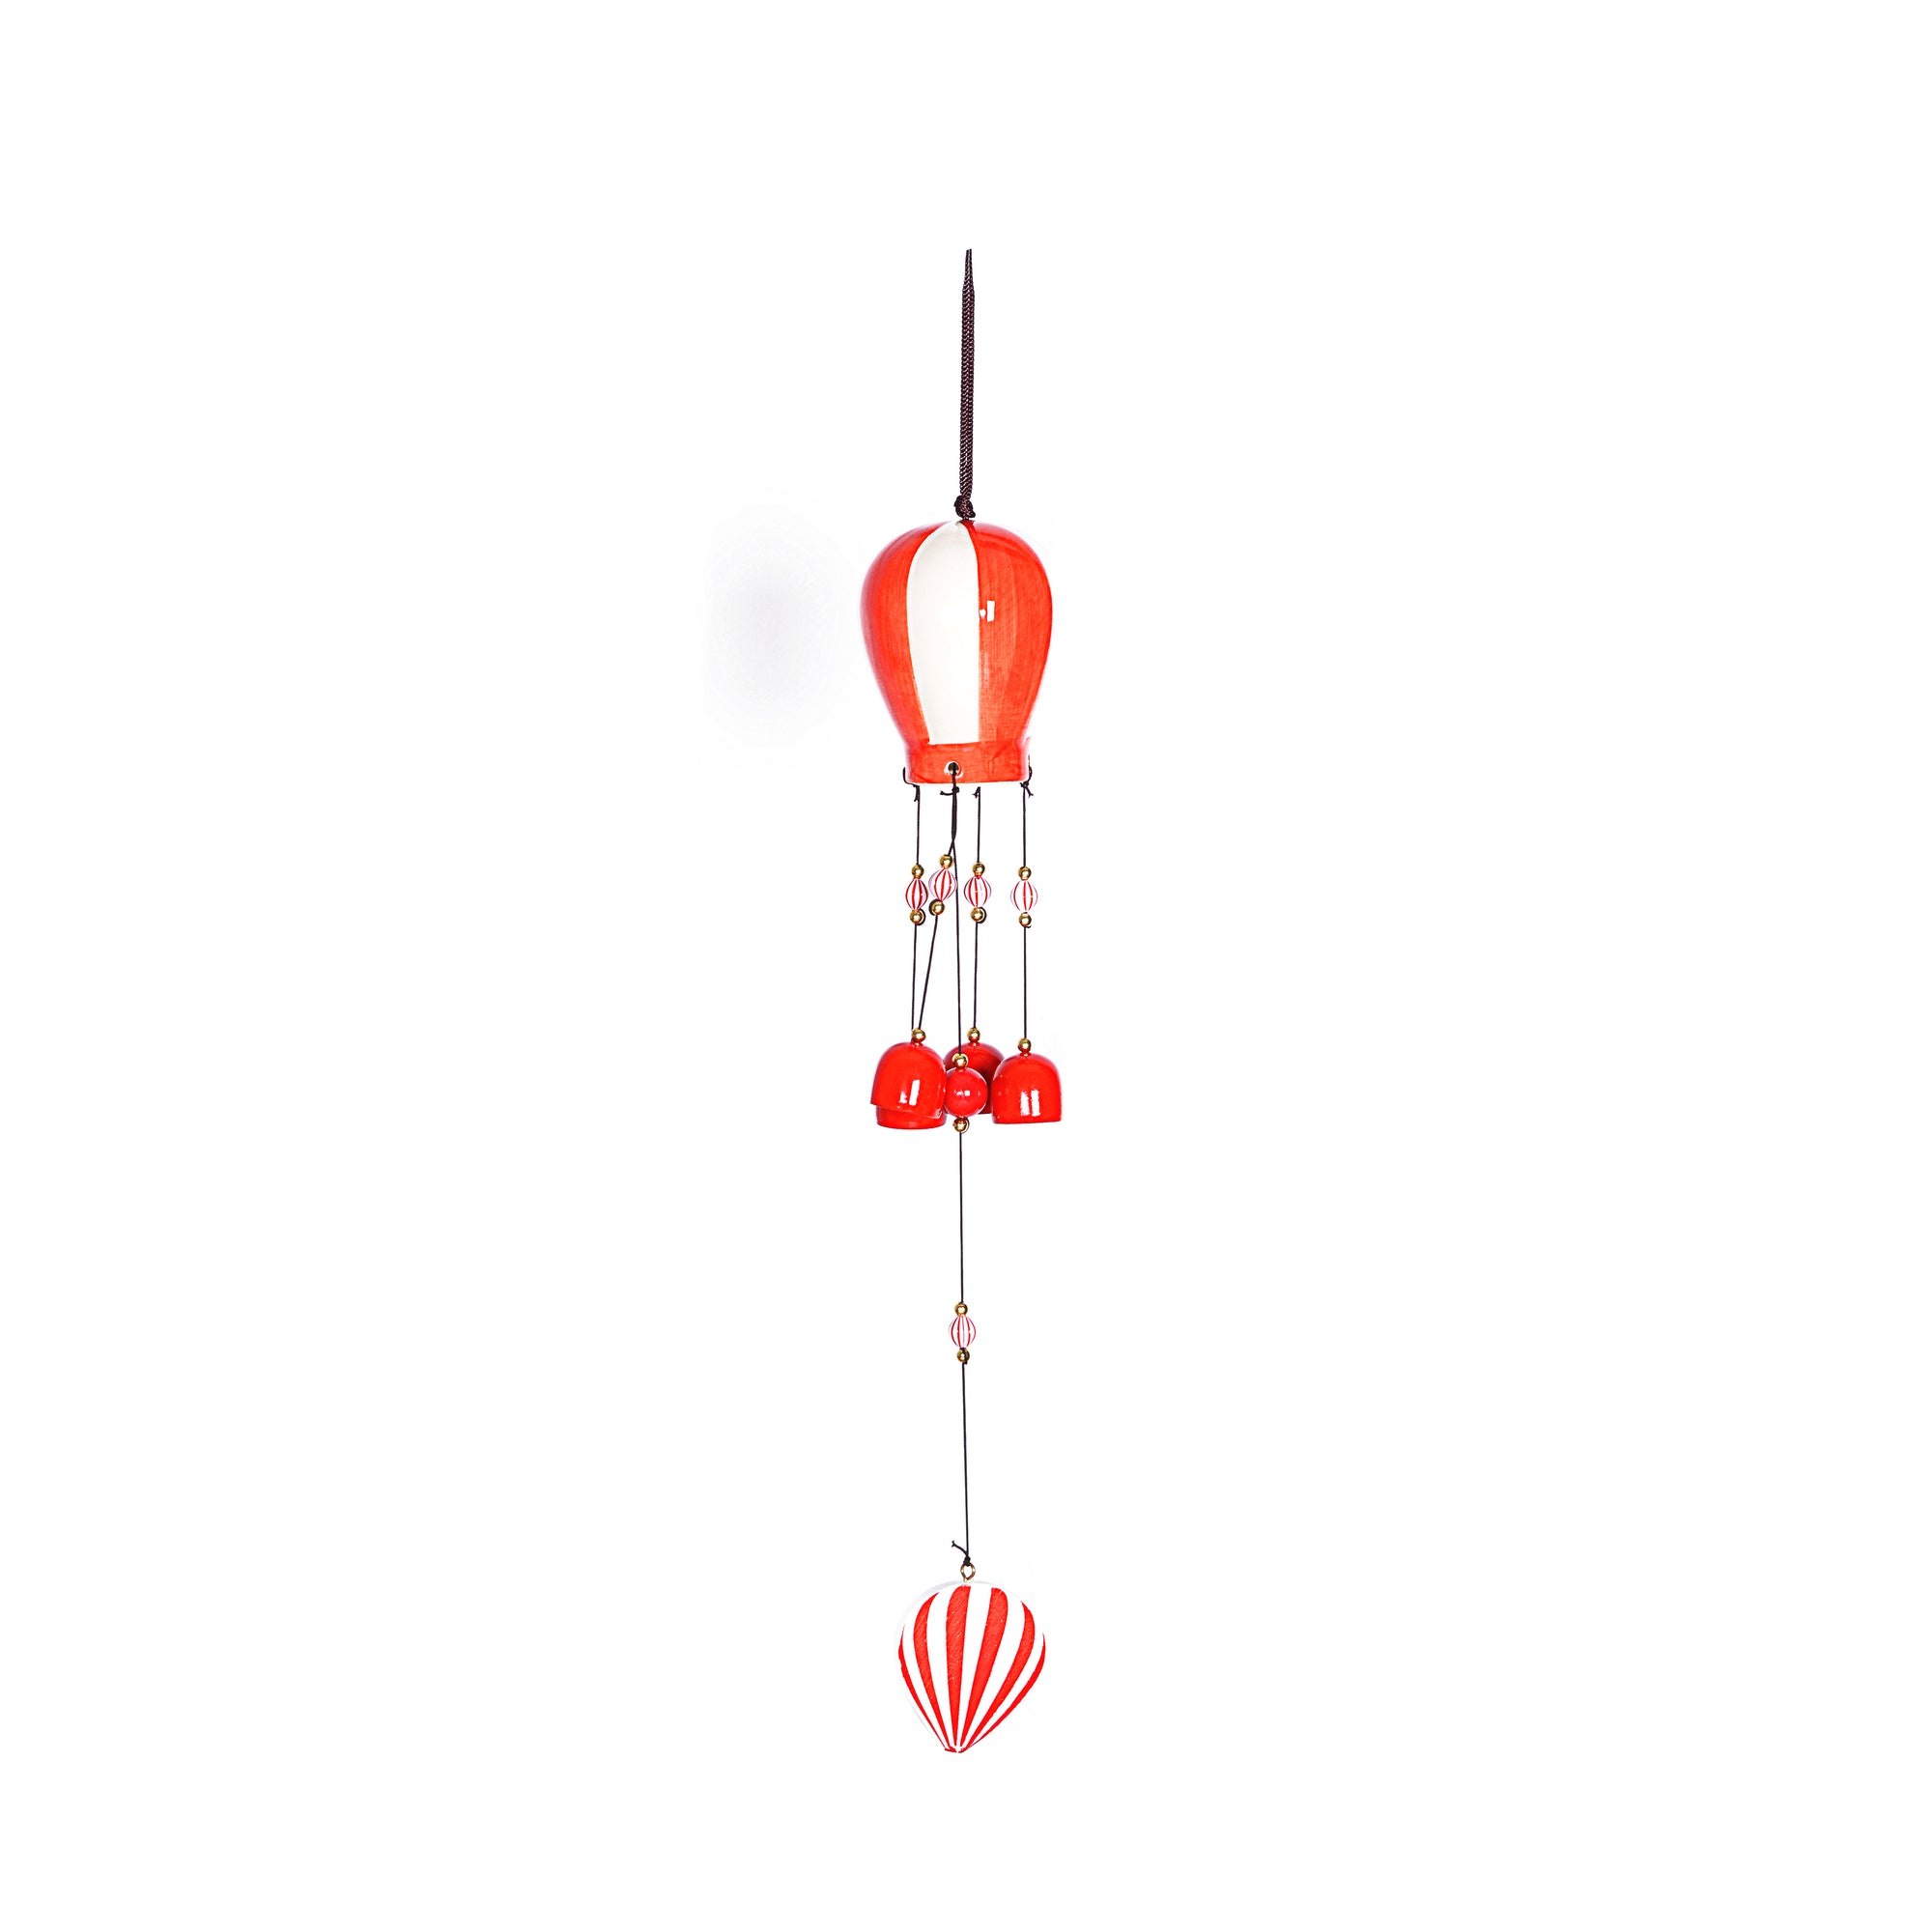 Wind Chimes with Decorative Red Loon Design